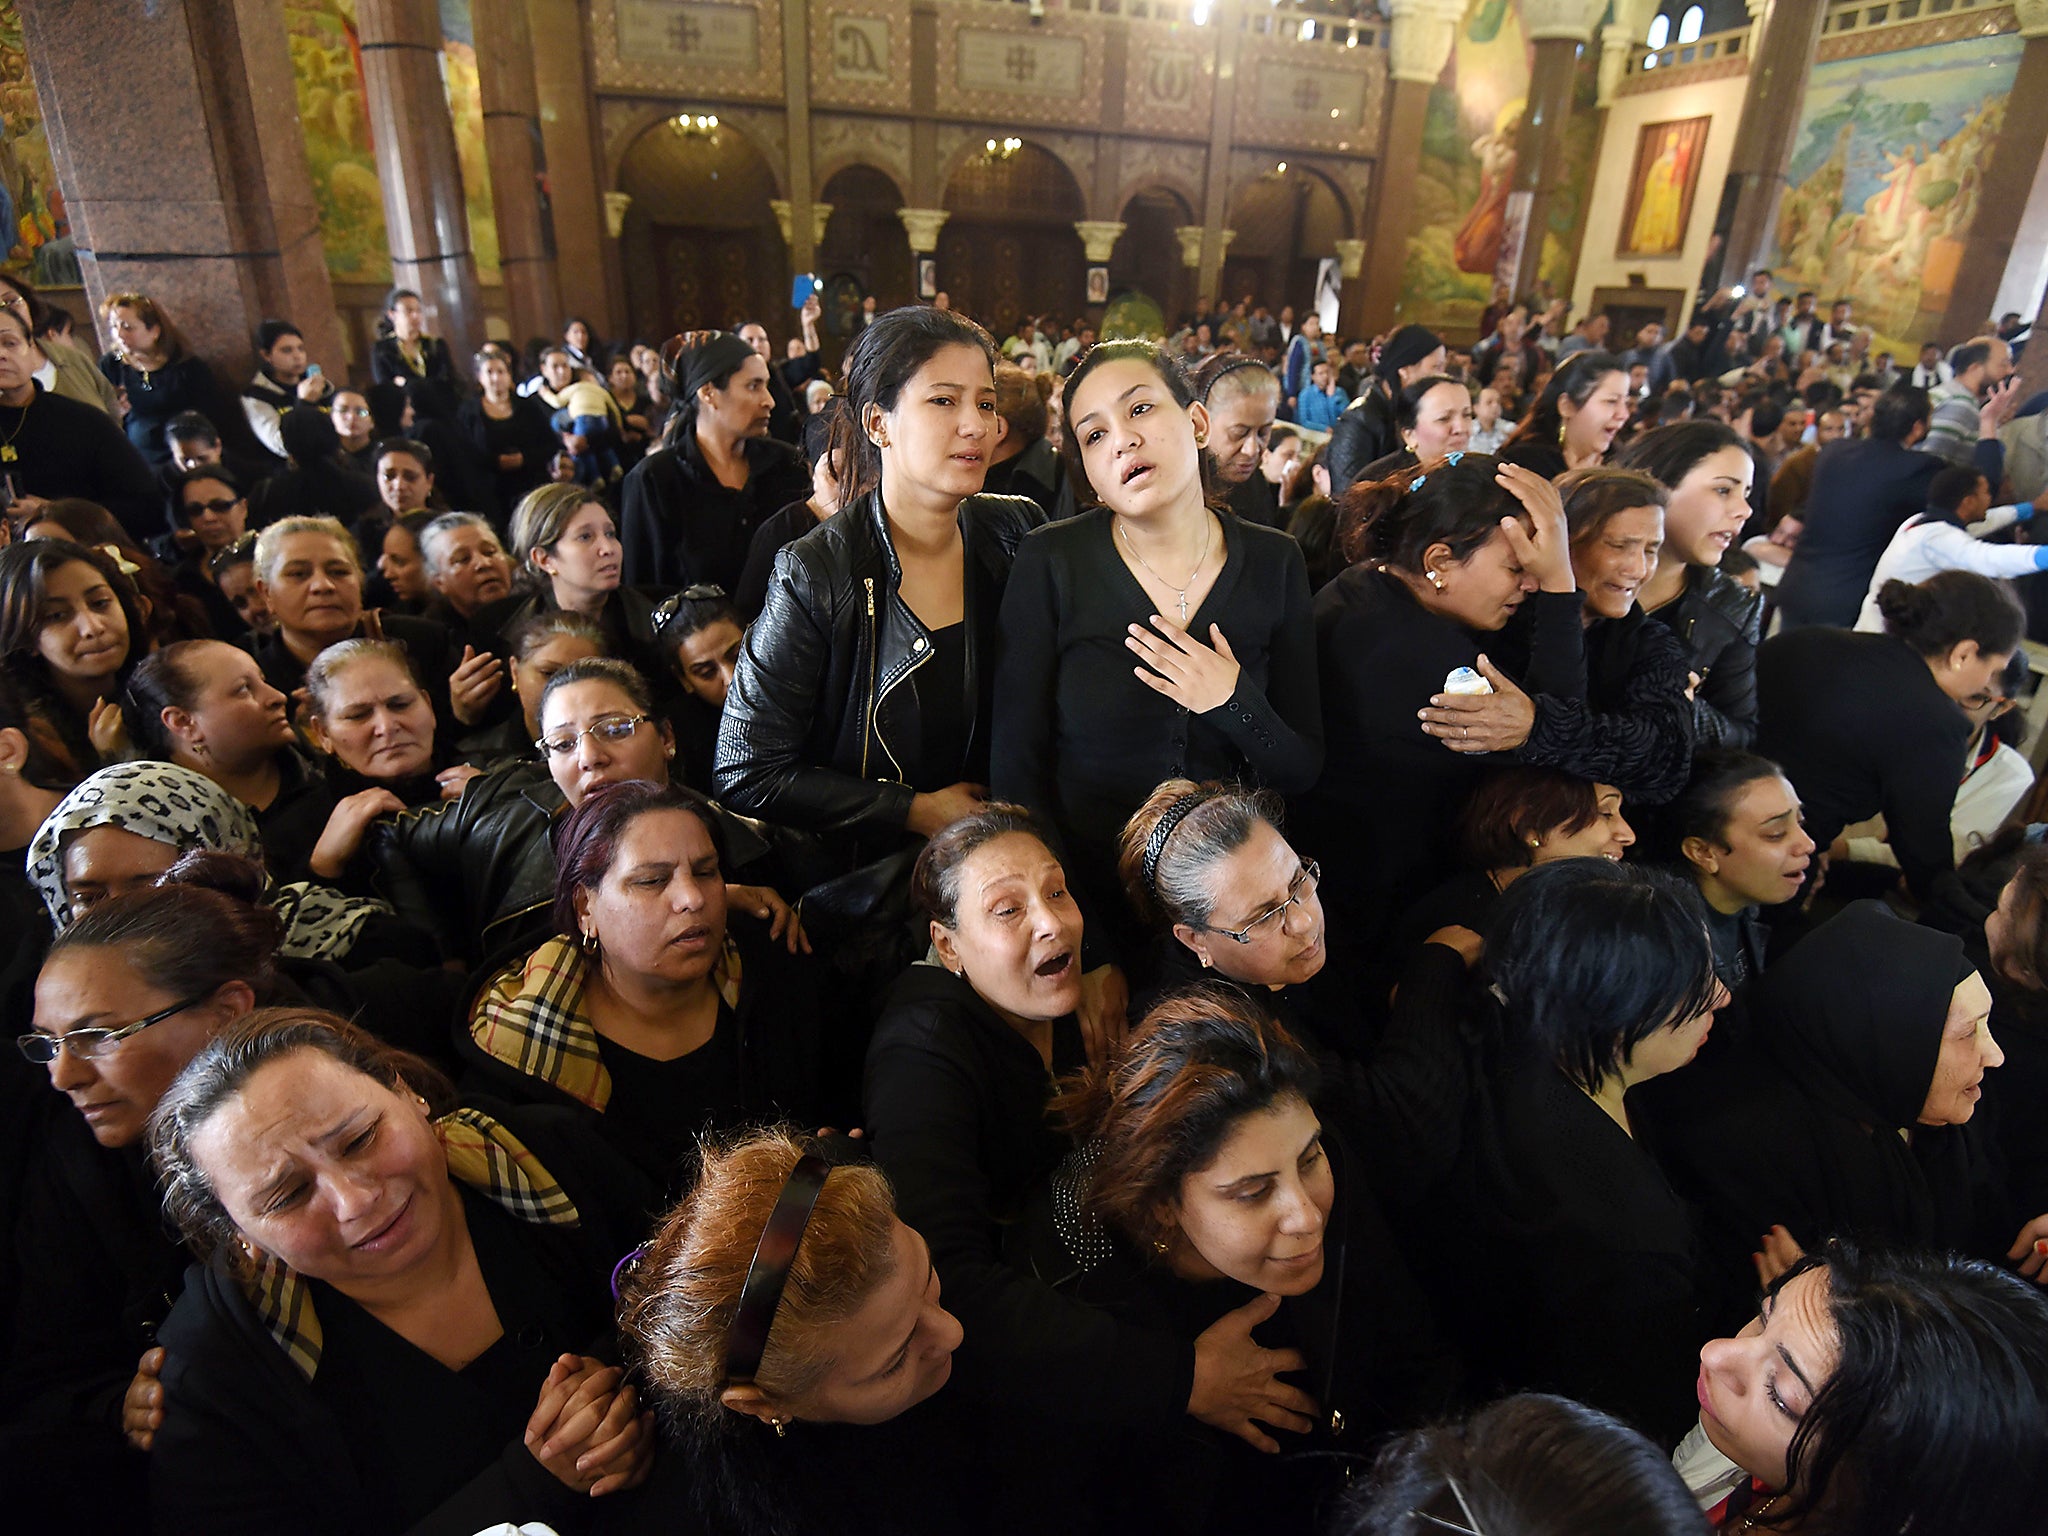 &#13;
Women mourn for the victims of the blast at the Coptic Christian Saint Mark's church in Alexandria (Getty)&#13;